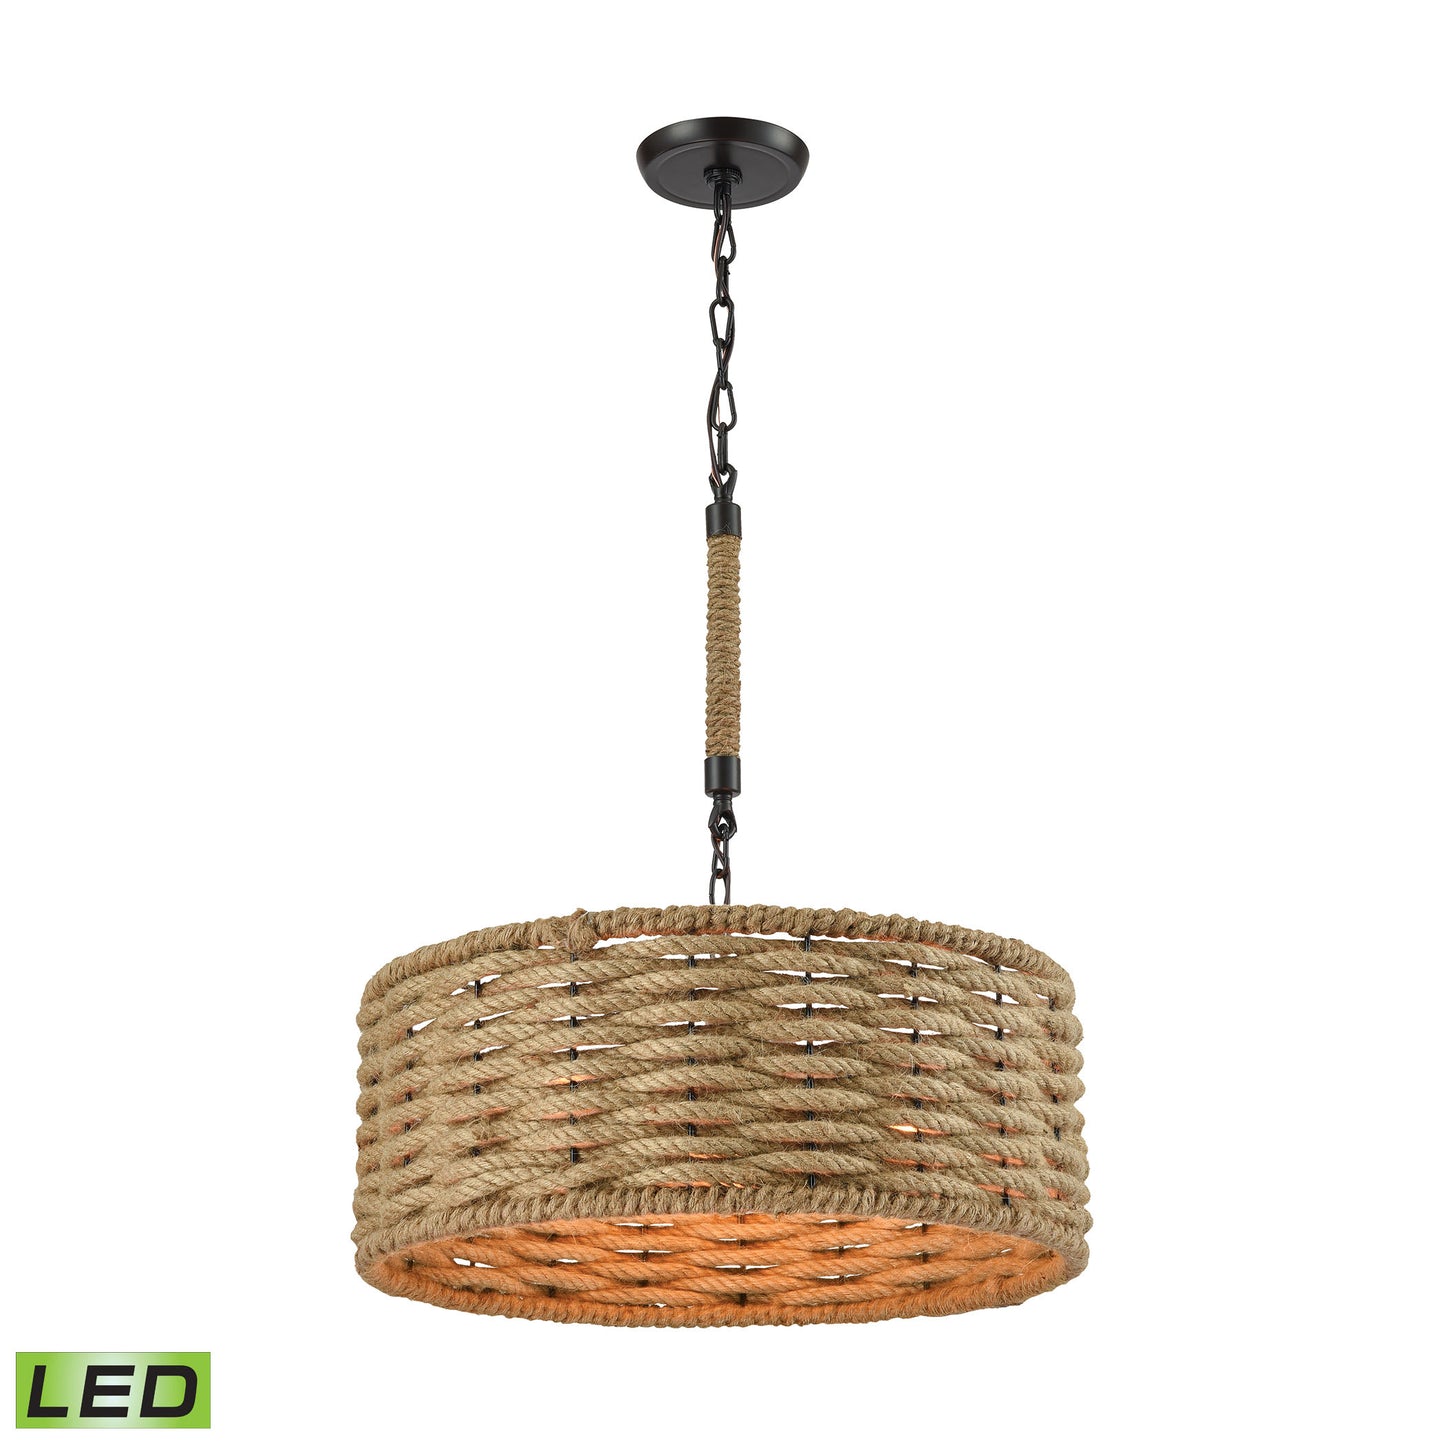 Weaverton 3-Light Chandelier in Oiled Bronze with Natural Rope-wrapped Shade - Includes LED Bulbs